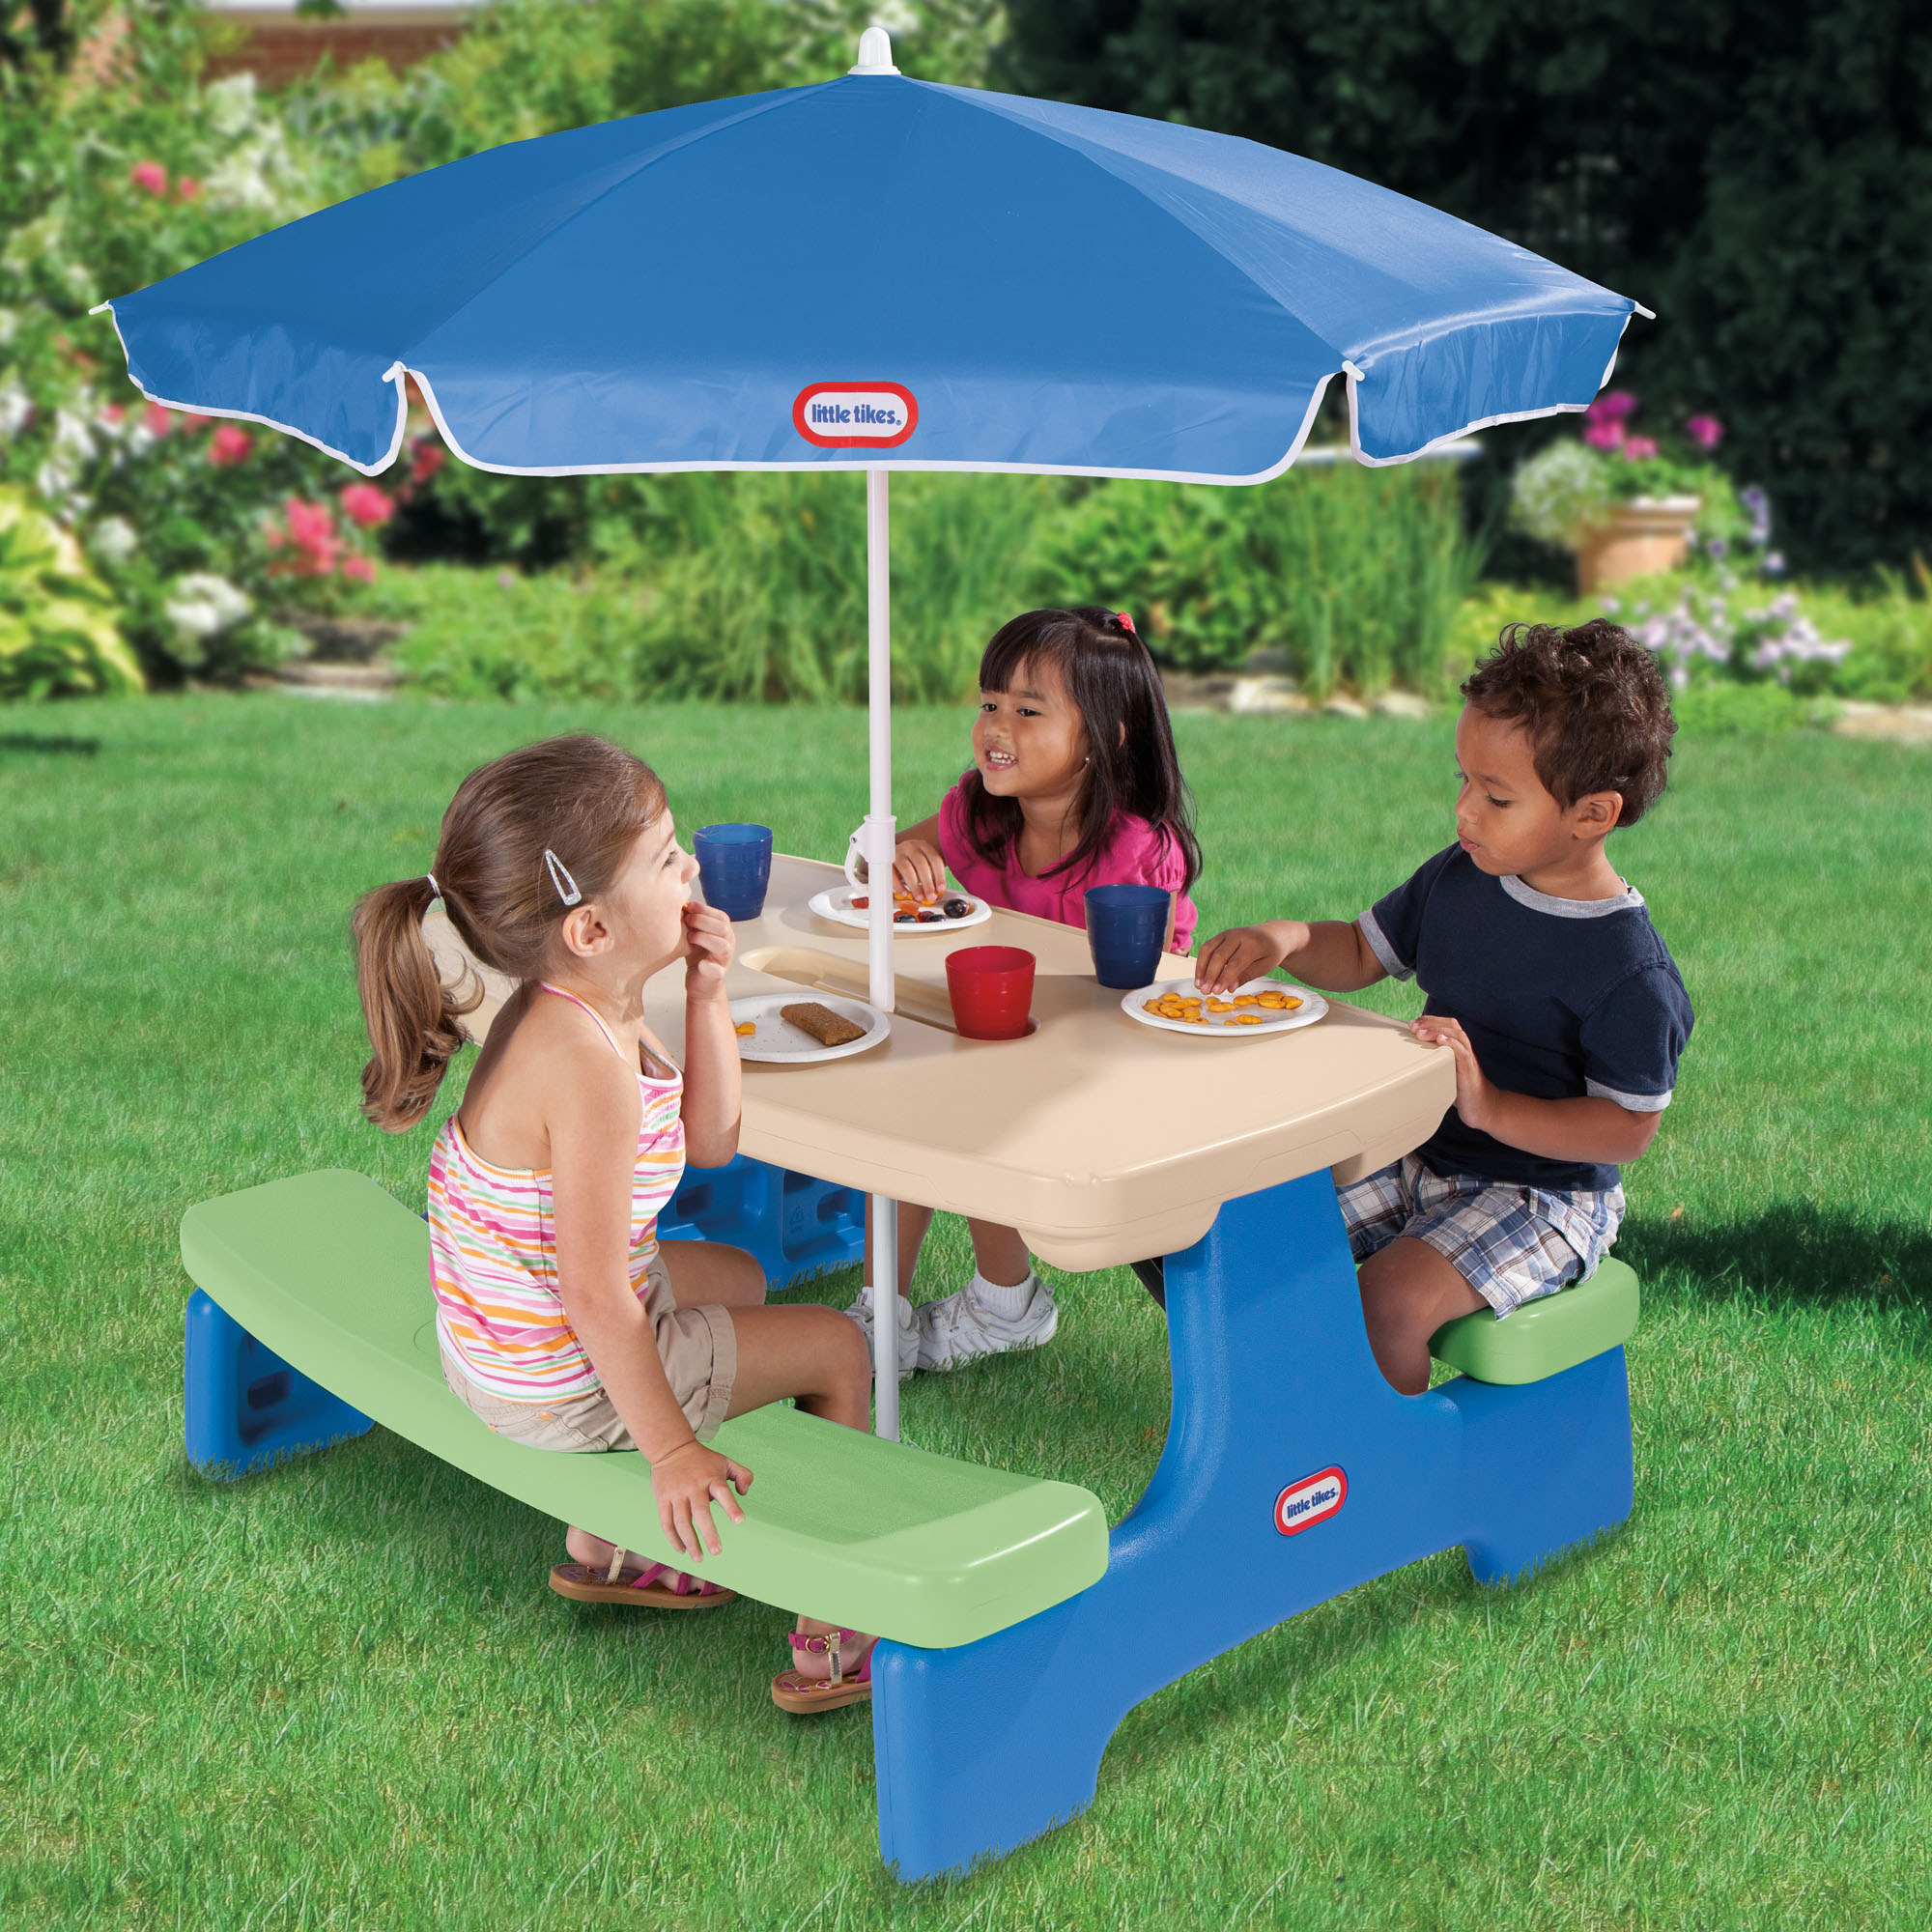 A group of children eating at the picnic table